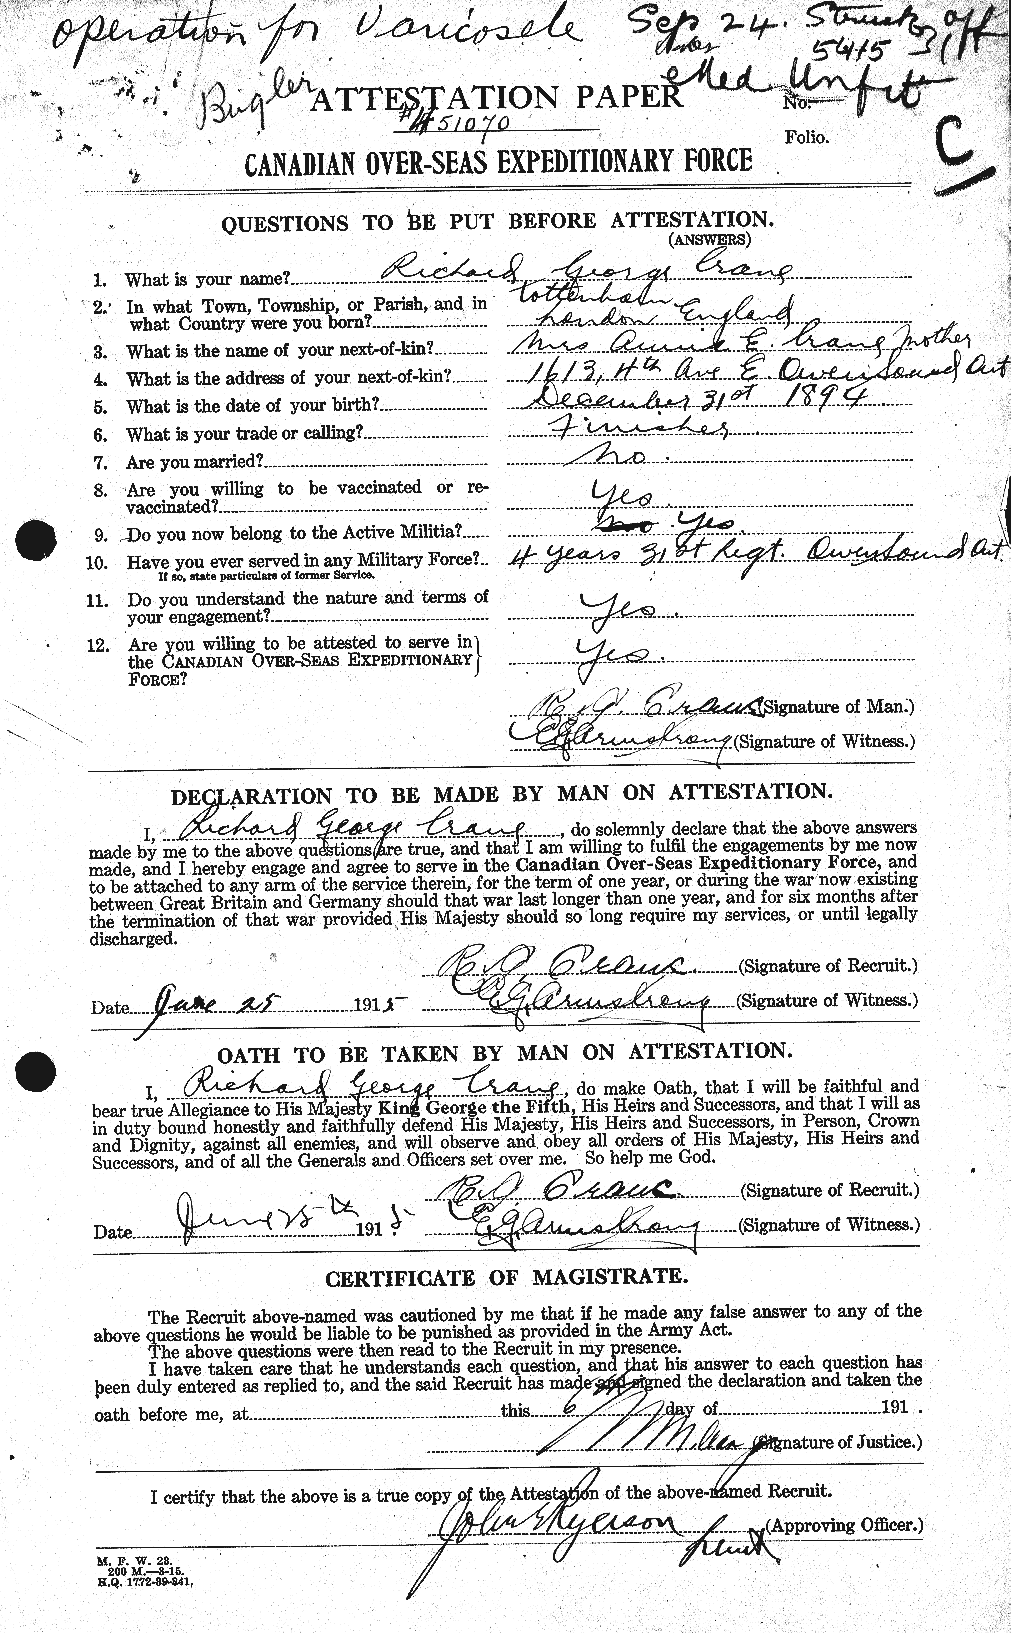 Personnel Records of the First World War - CEF 061755a